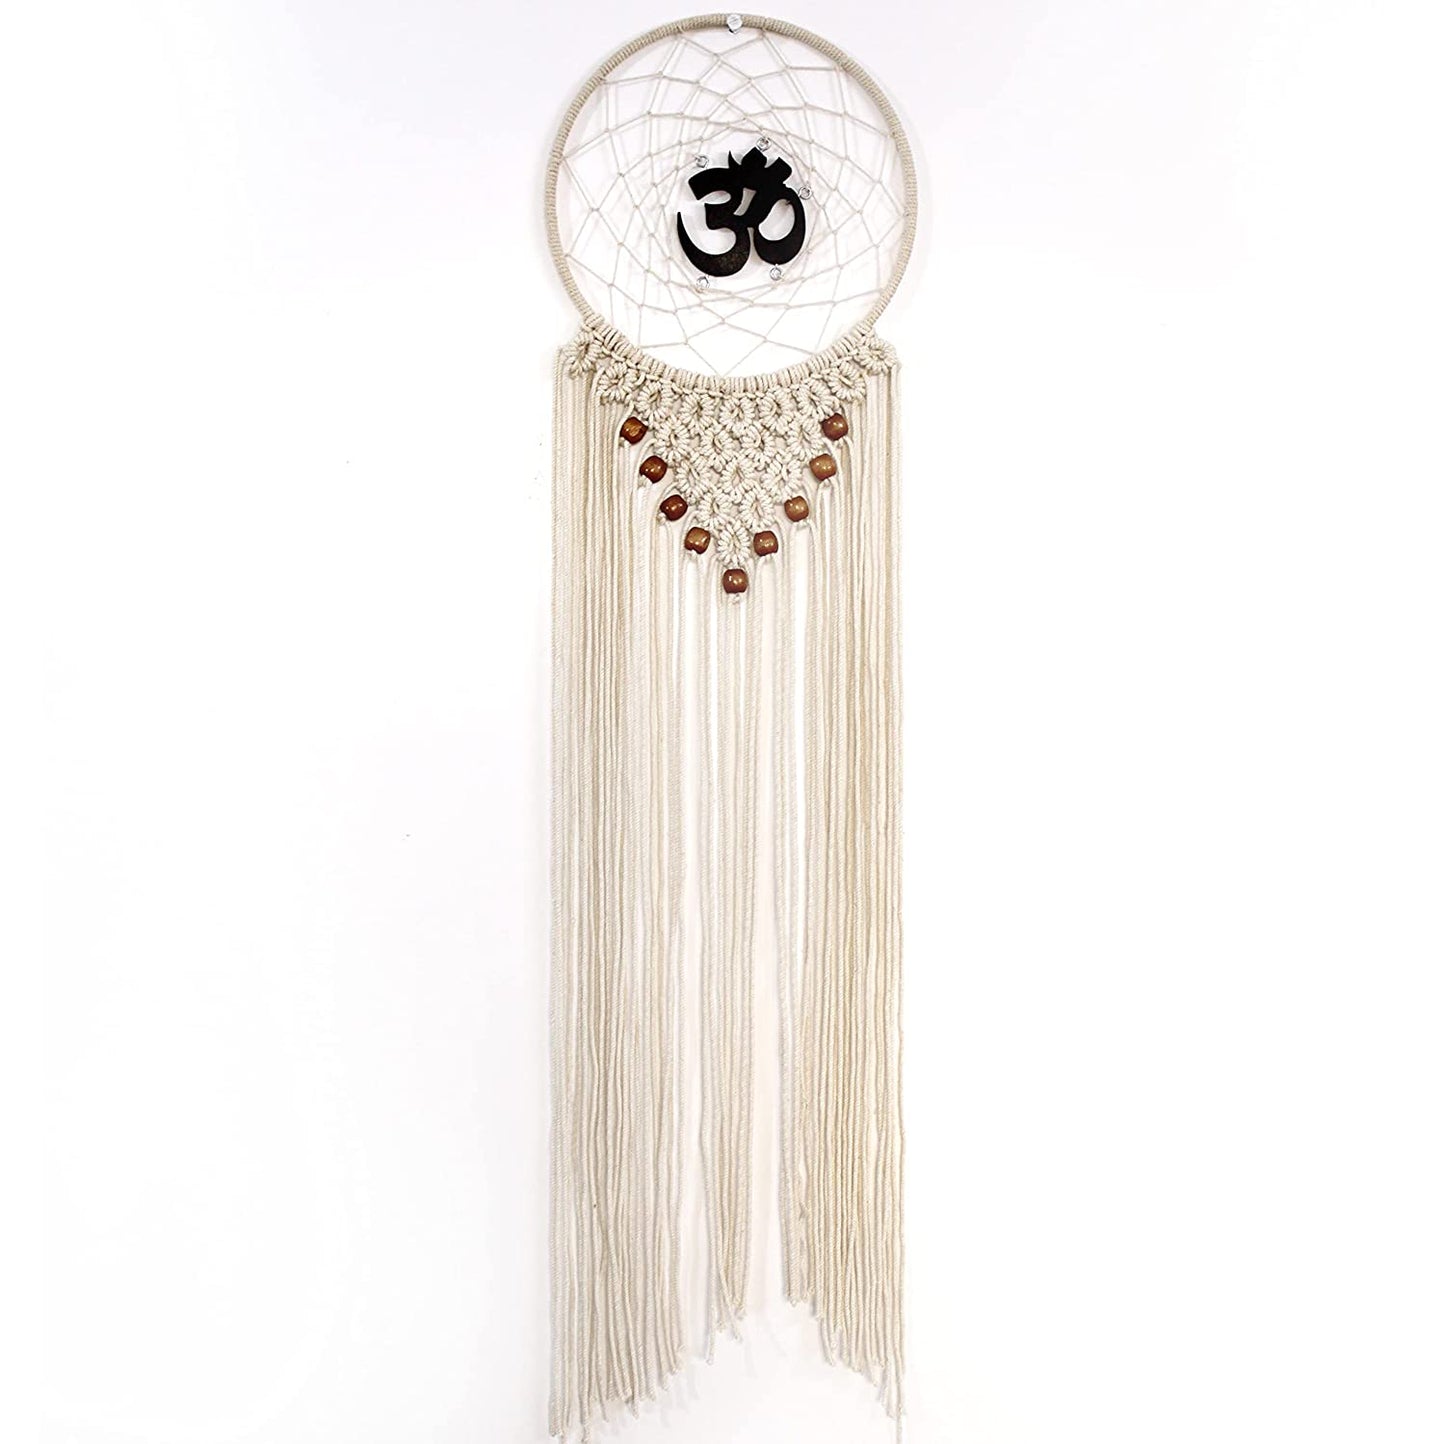 Om Macrame with Decorative Beads Design Wall Hanging